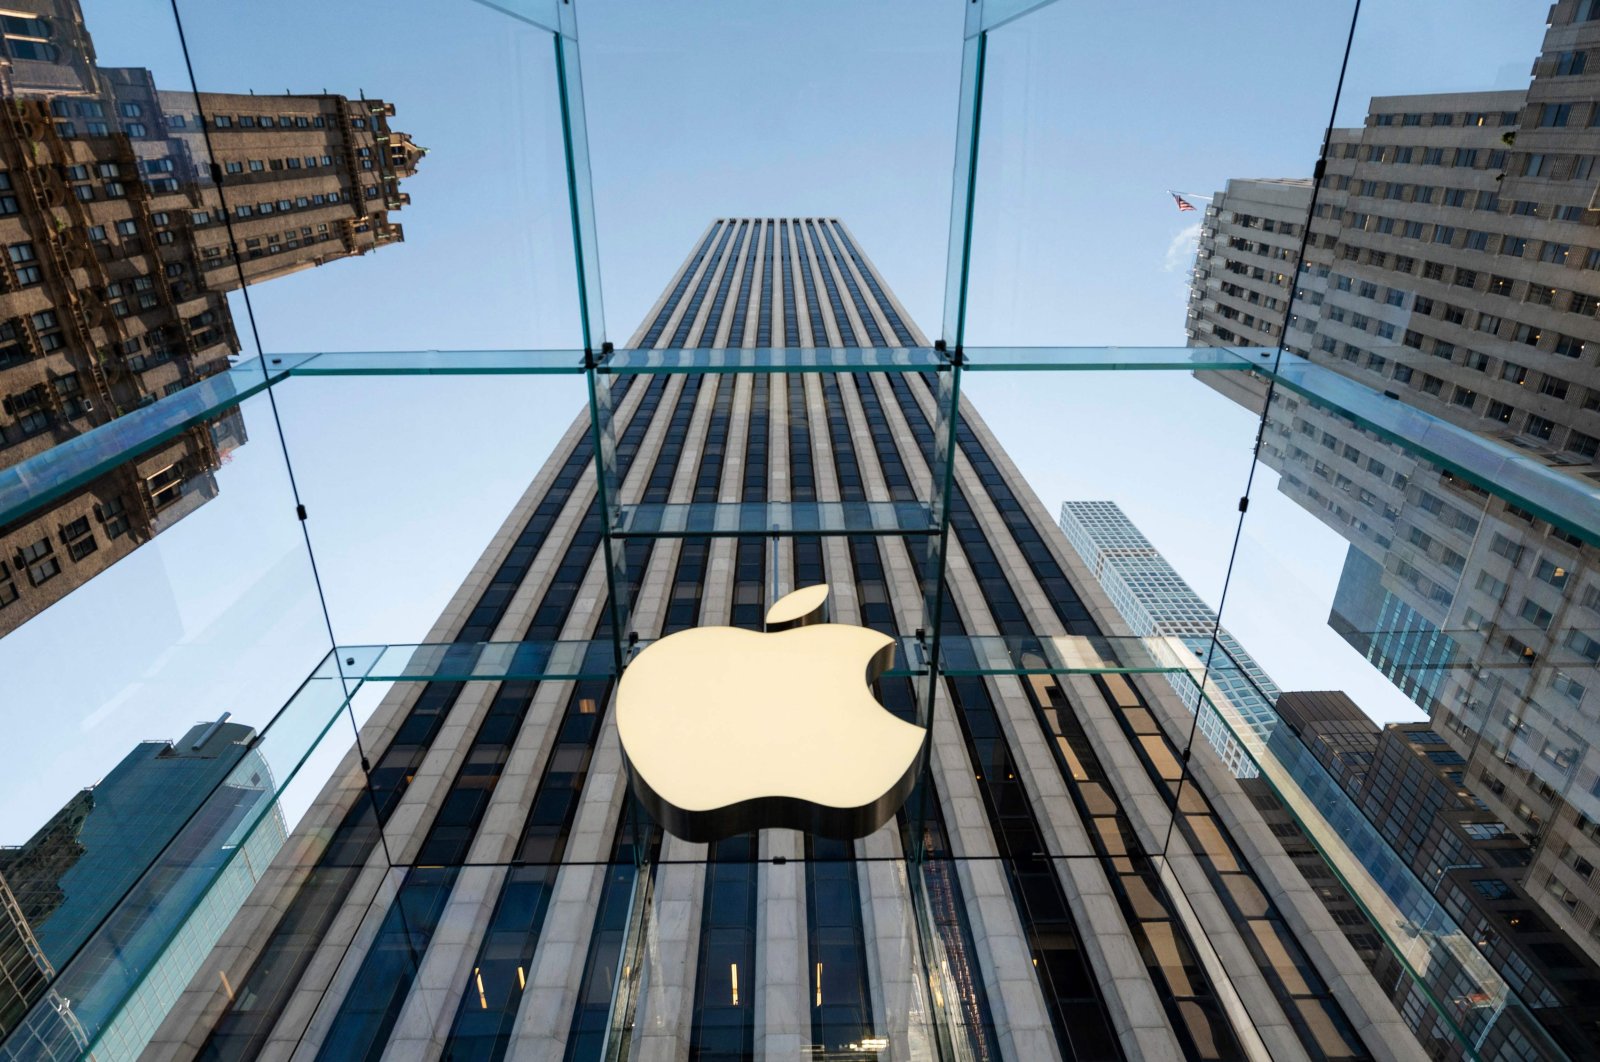 The newly renovated Apple Store on Fifth Avenue is pictured in New York City, U.S., Sept. 19, 2019. (AFP Photo)